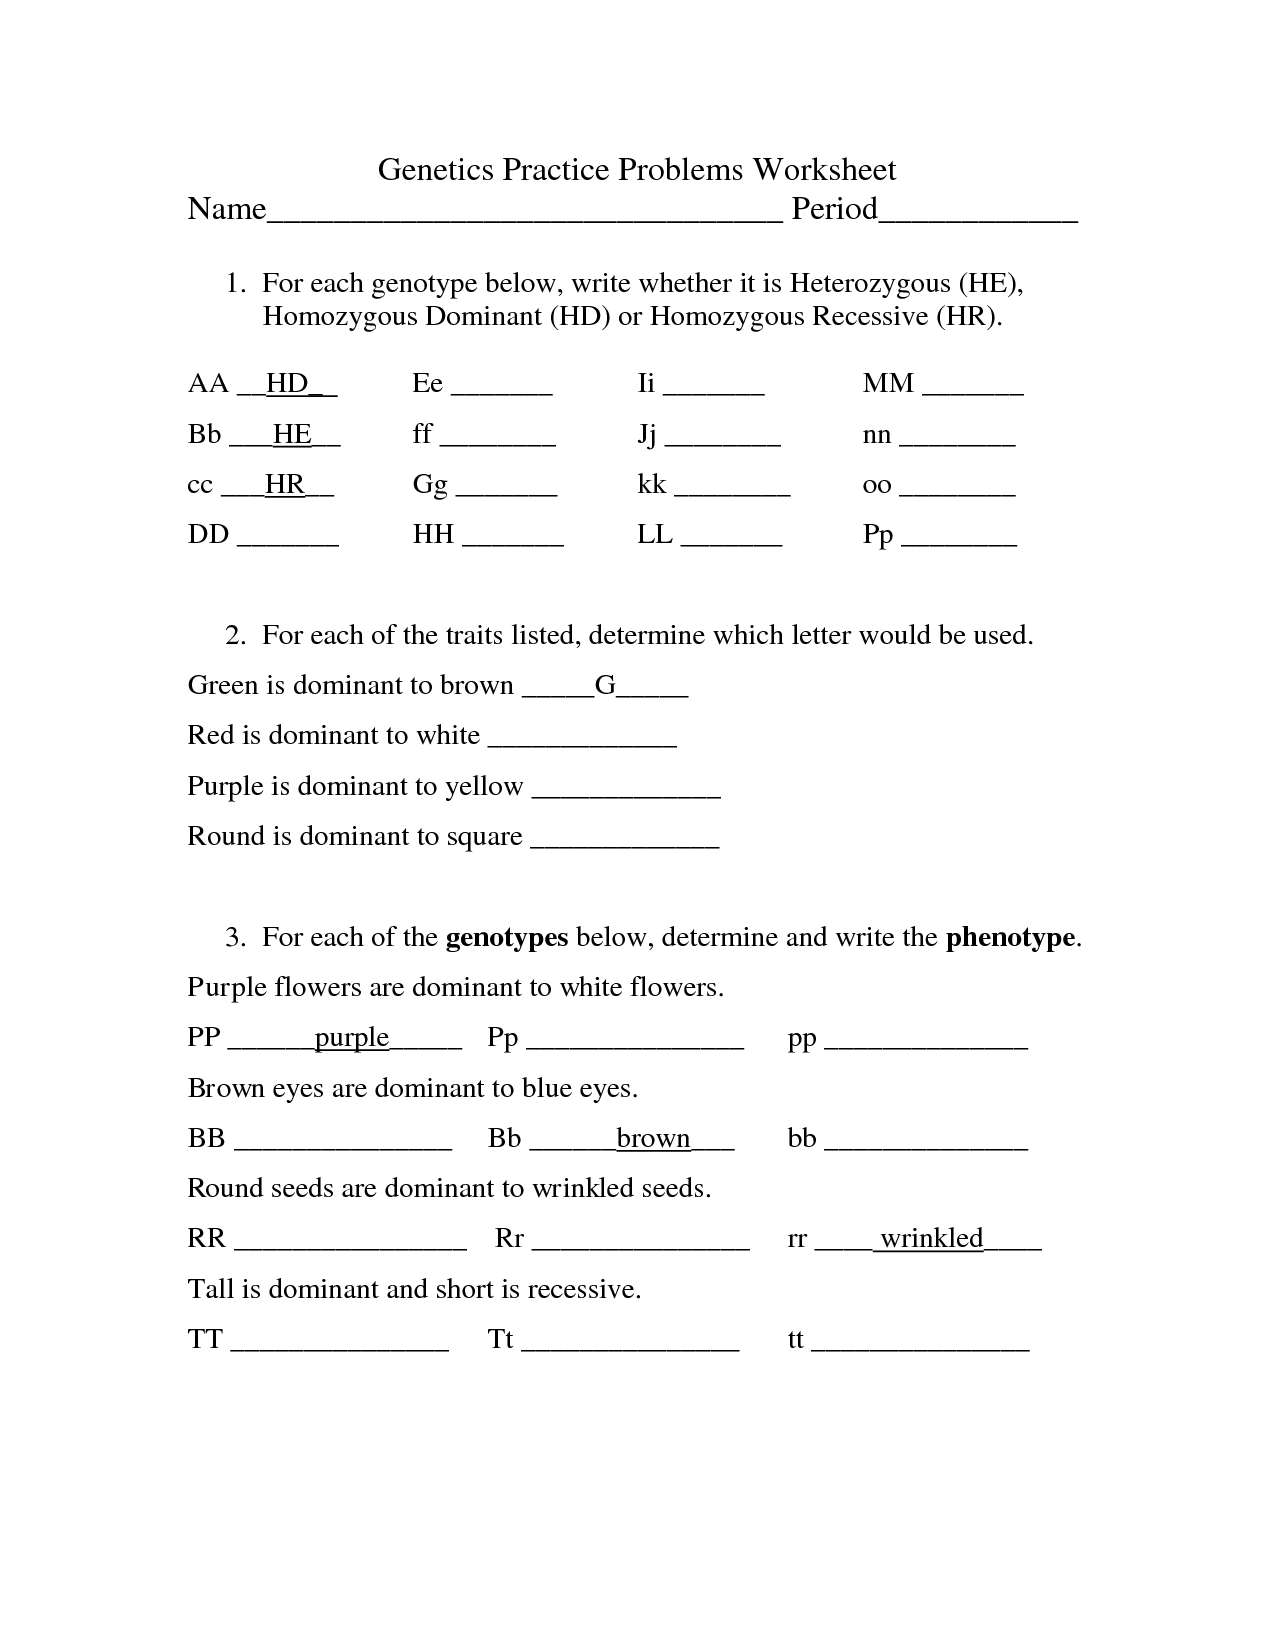 14 Best Images of Genetics Problems Worksheet With Answer Keys  Genetics Practice Problems 